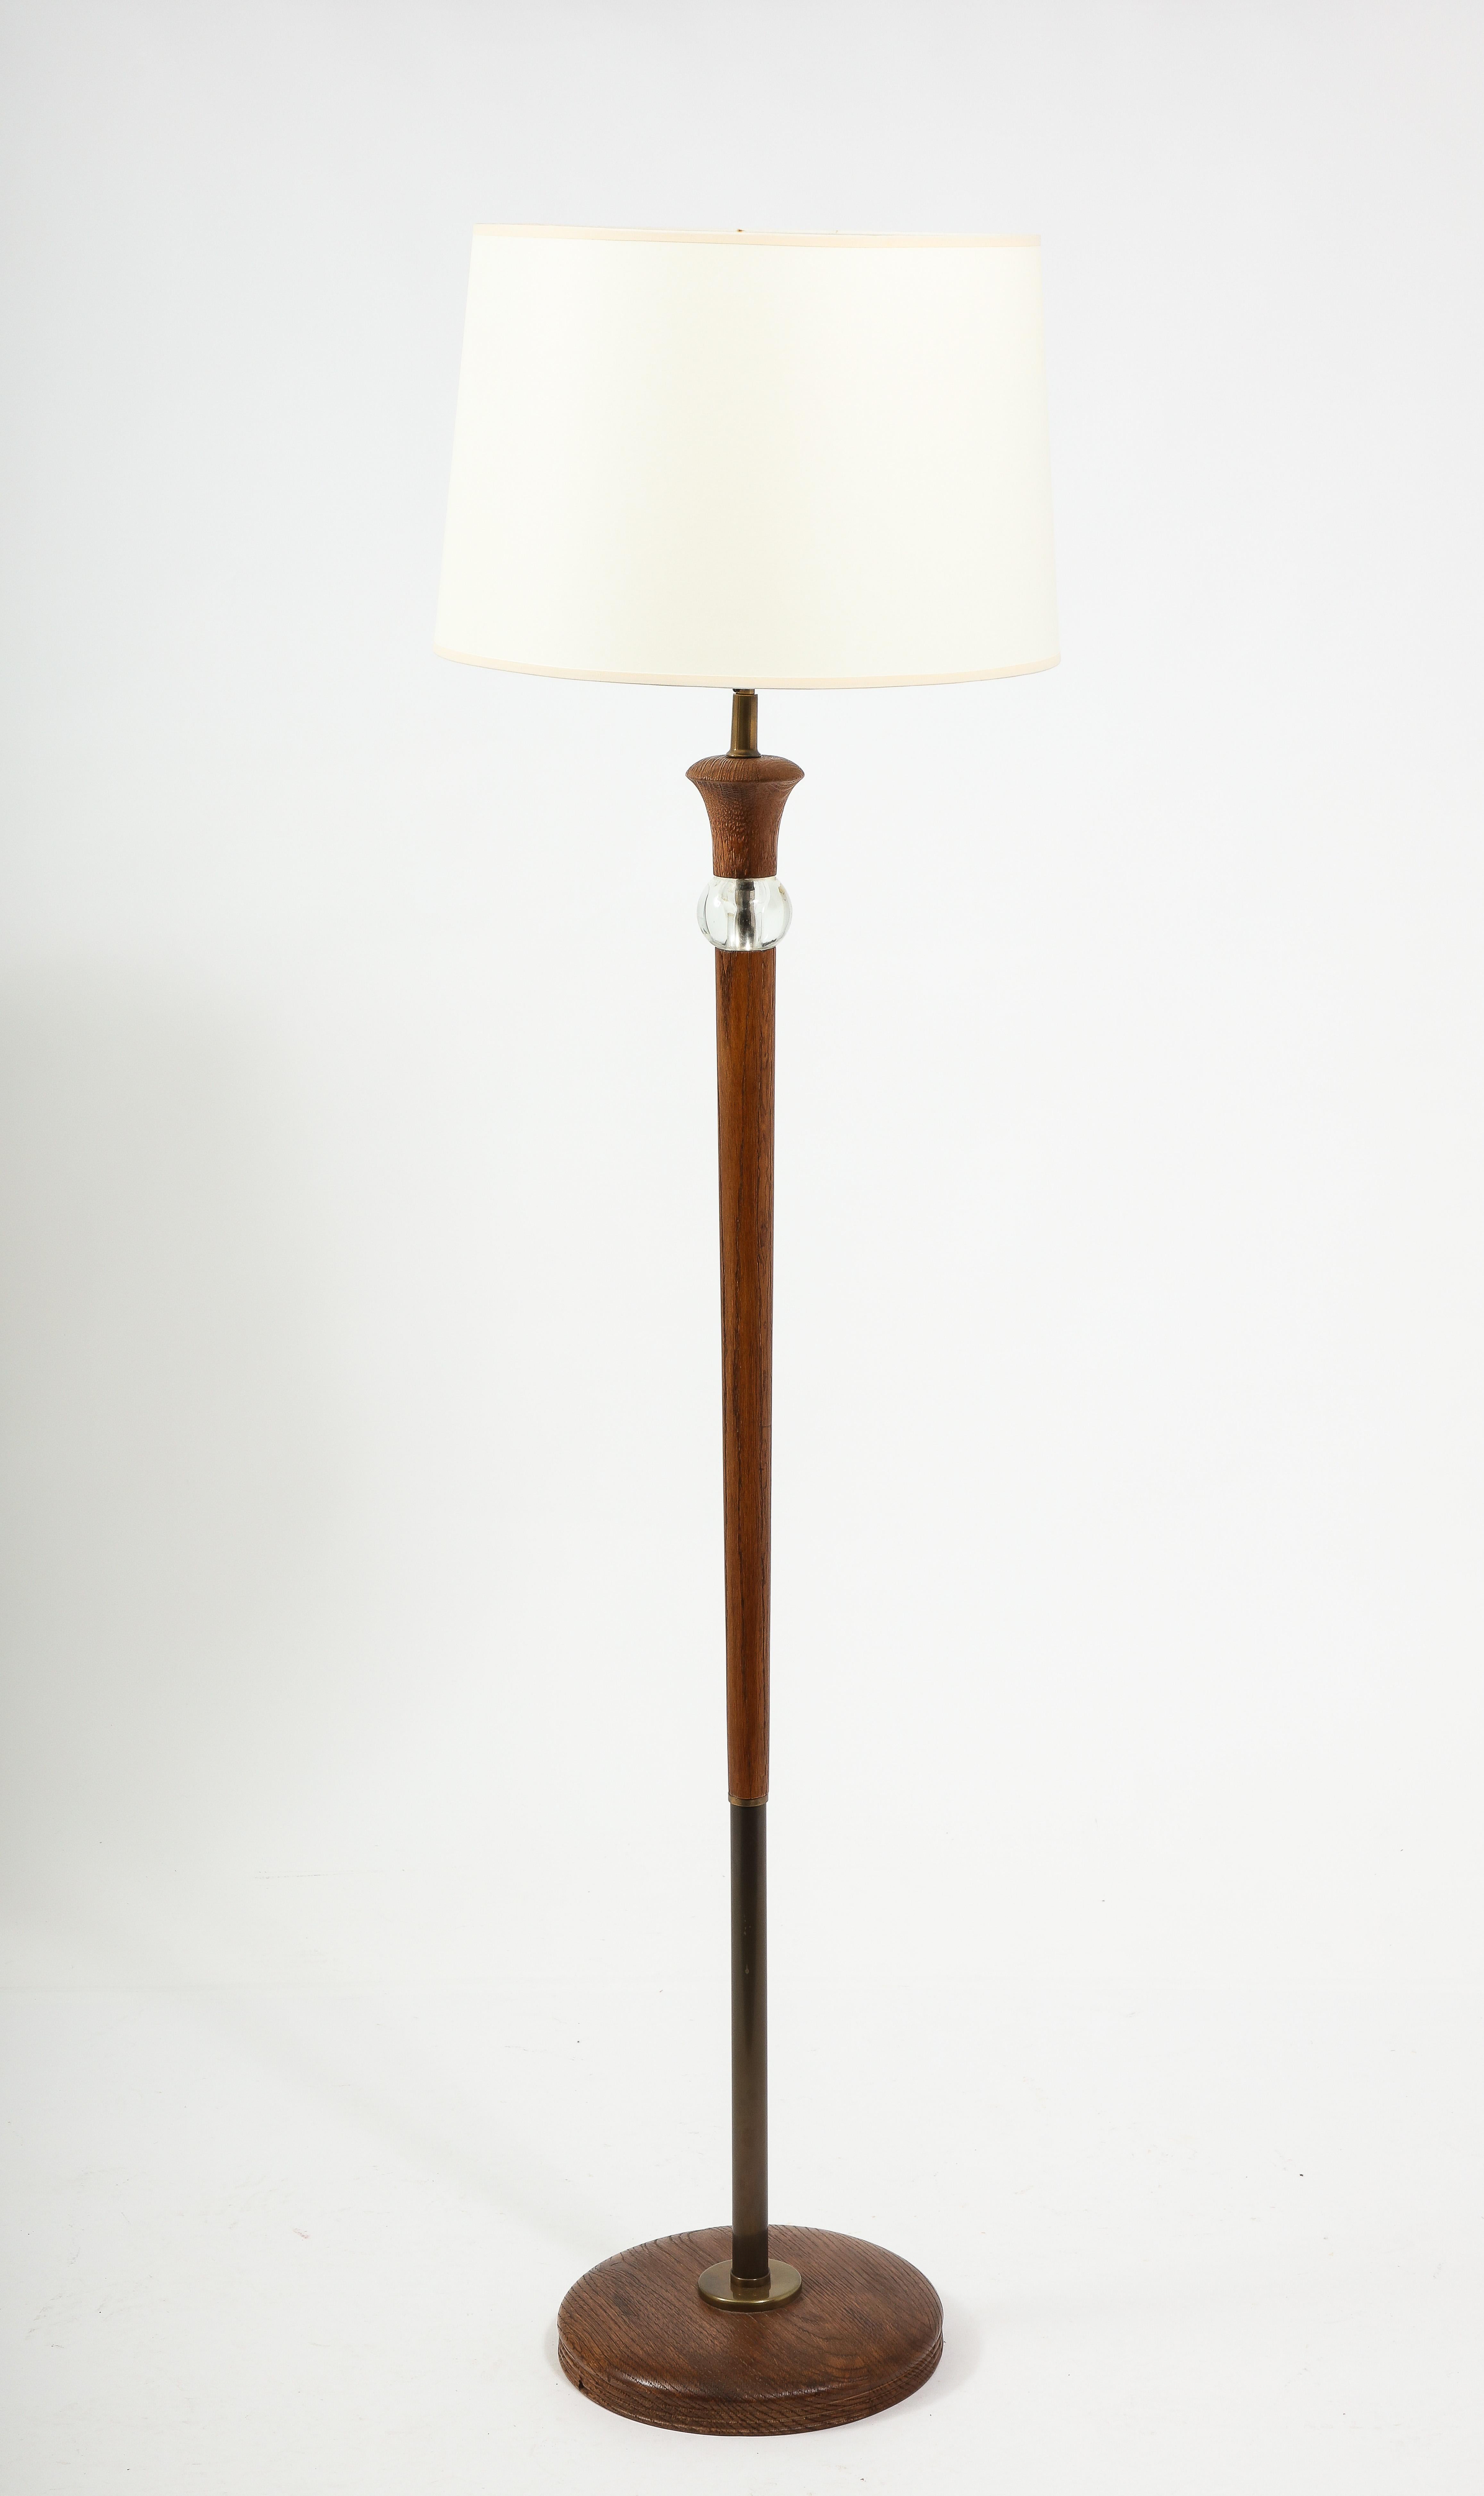 Elegant floor lamp in oak and glass with Brass details.

Base 50x12